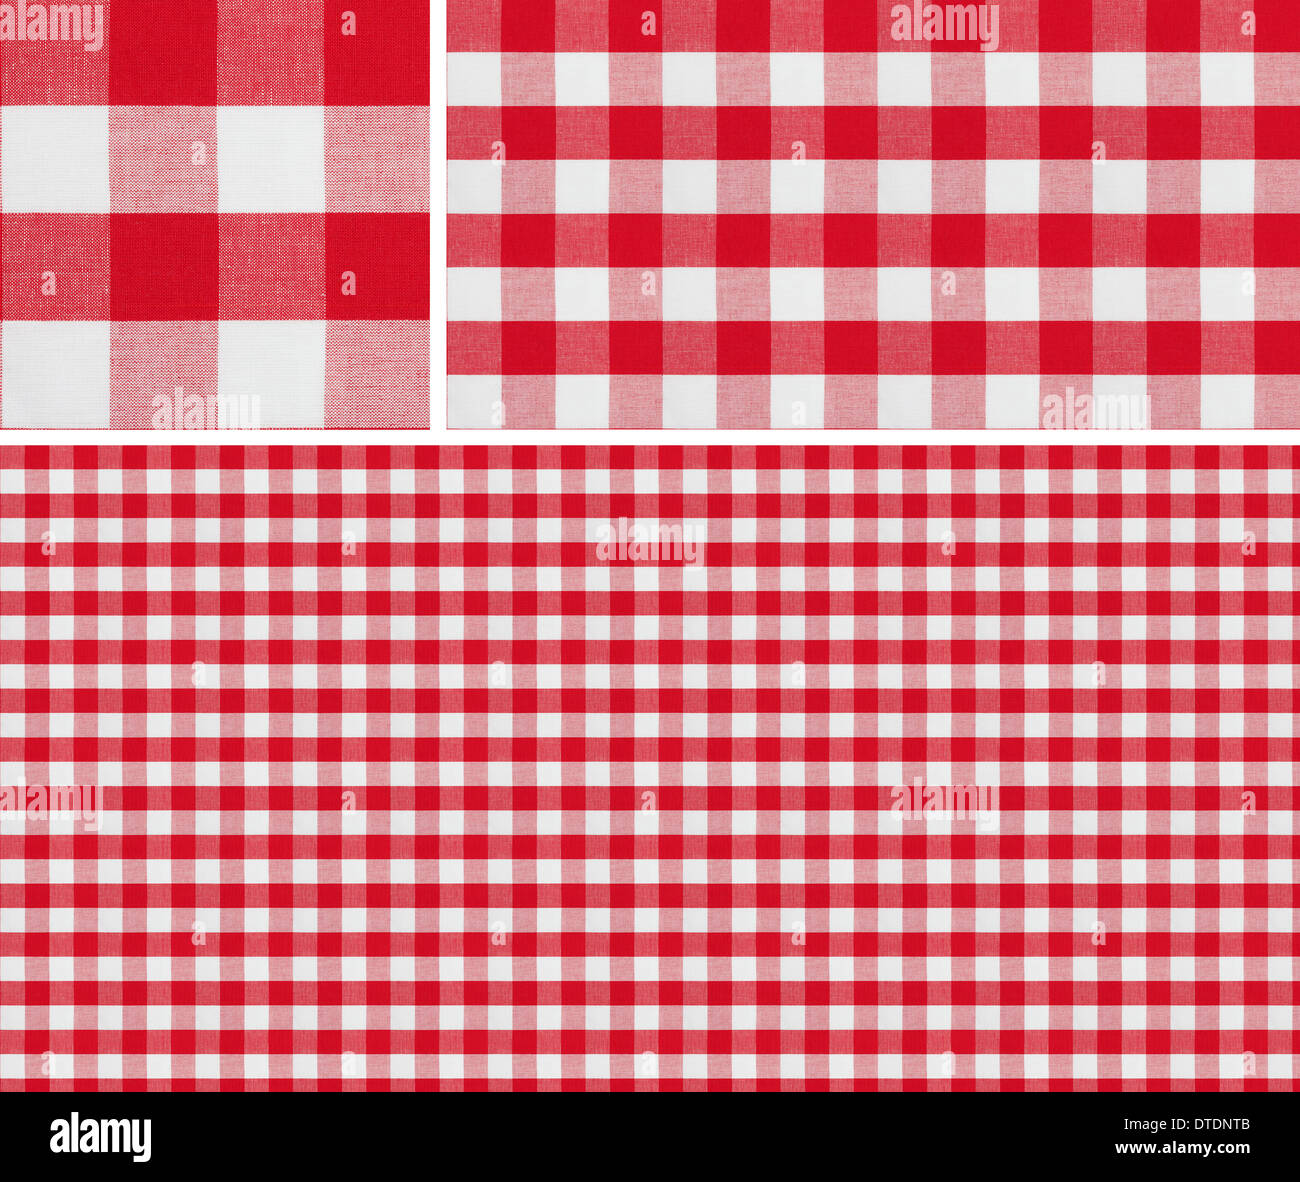 Seamless picnic pattern 1500x1500 with samples. Good for red checkered tablecloth creation of any size. Stock Photo